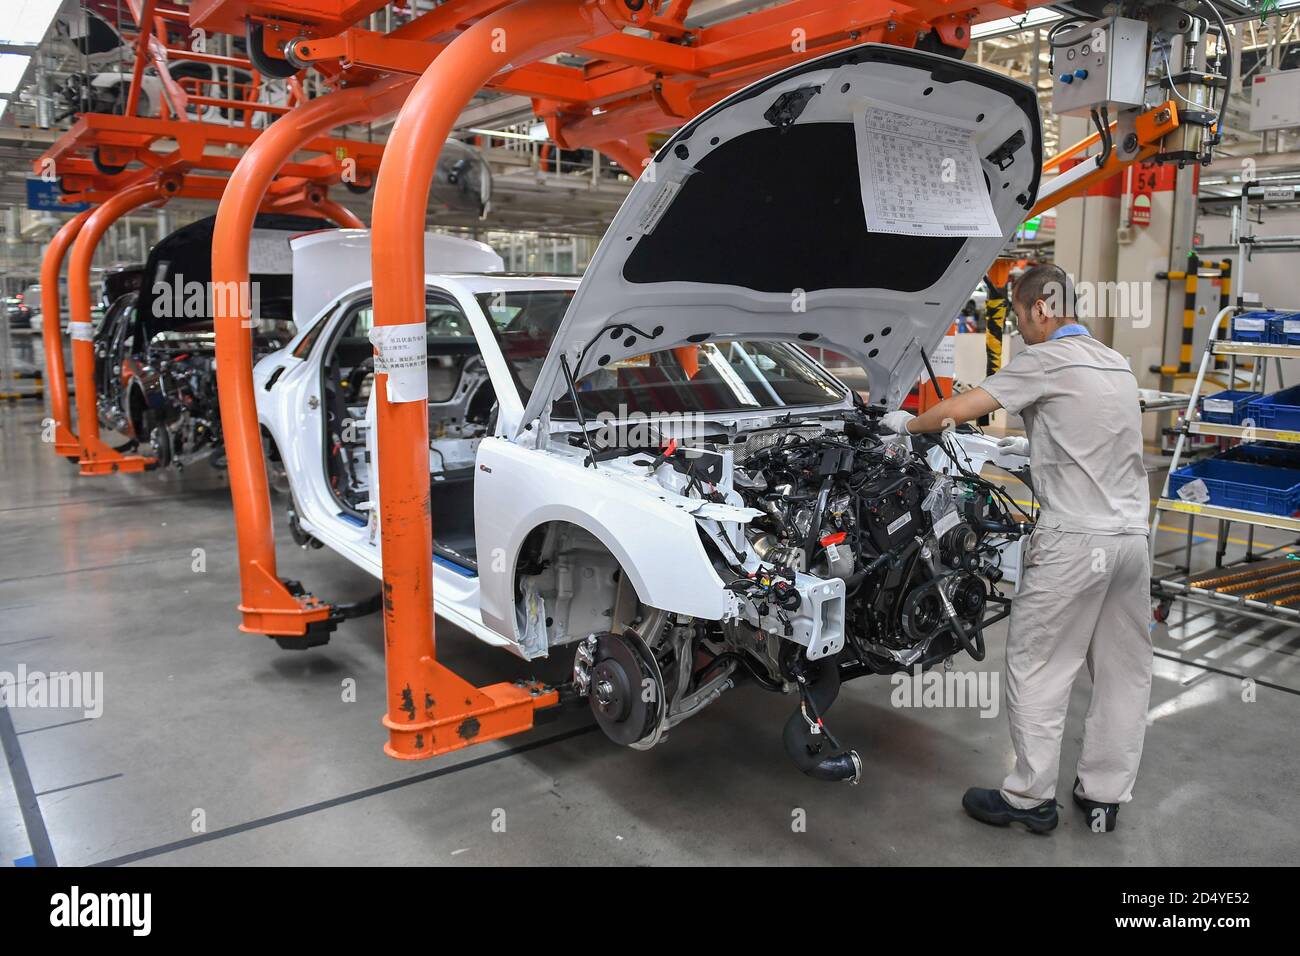 Changchun, China's Jilin Province. 1st Sep, 2020. A worker assembles a car at a factory of the First Automotive Works (FAW) Group Co., Ltd. in Changchun, capital of northeast China's Jilin Province, Sept. 1, 2020. China's leading automaker First Automotive Works (FAW) Group Co., Ltd. sold 2,656,744 vehicles in the first three quarters of the year, up 8 percent year on year, according to corporate sources. Credit: Zhang Nan/Xinhua/Alamy Live News Stock Photo